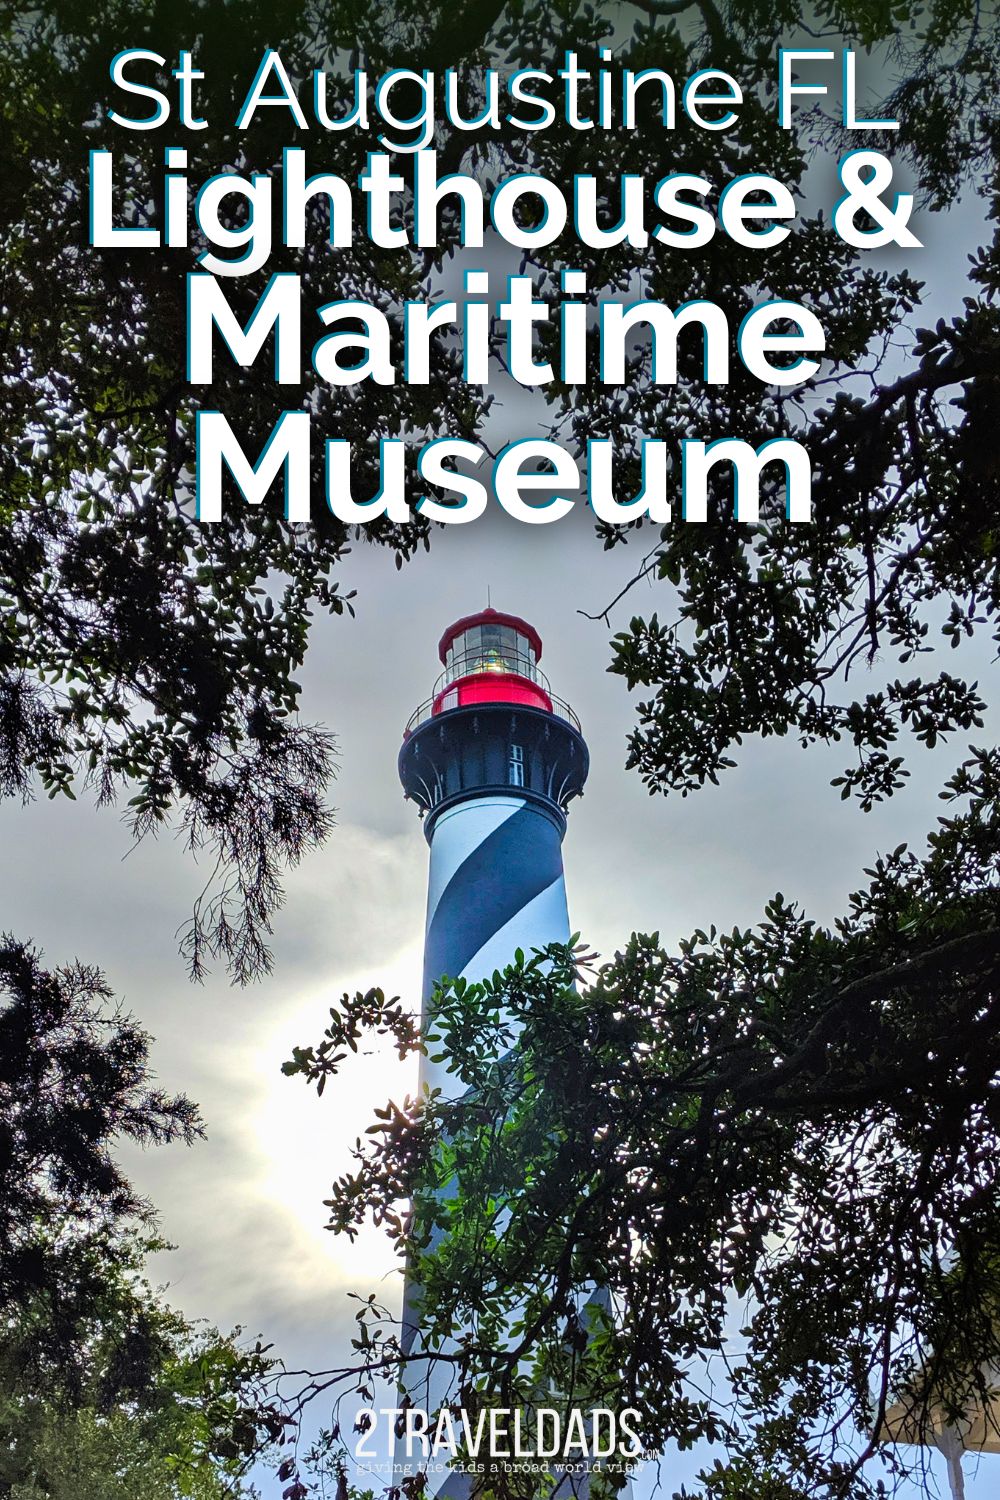 Visiting the St Augustine Lighthouse and Maritime Museum is one of the most popular things to do in America's oldest city. Details on how to climb to the top, what's in the museum and what to do near the St Augustine lighthouse.